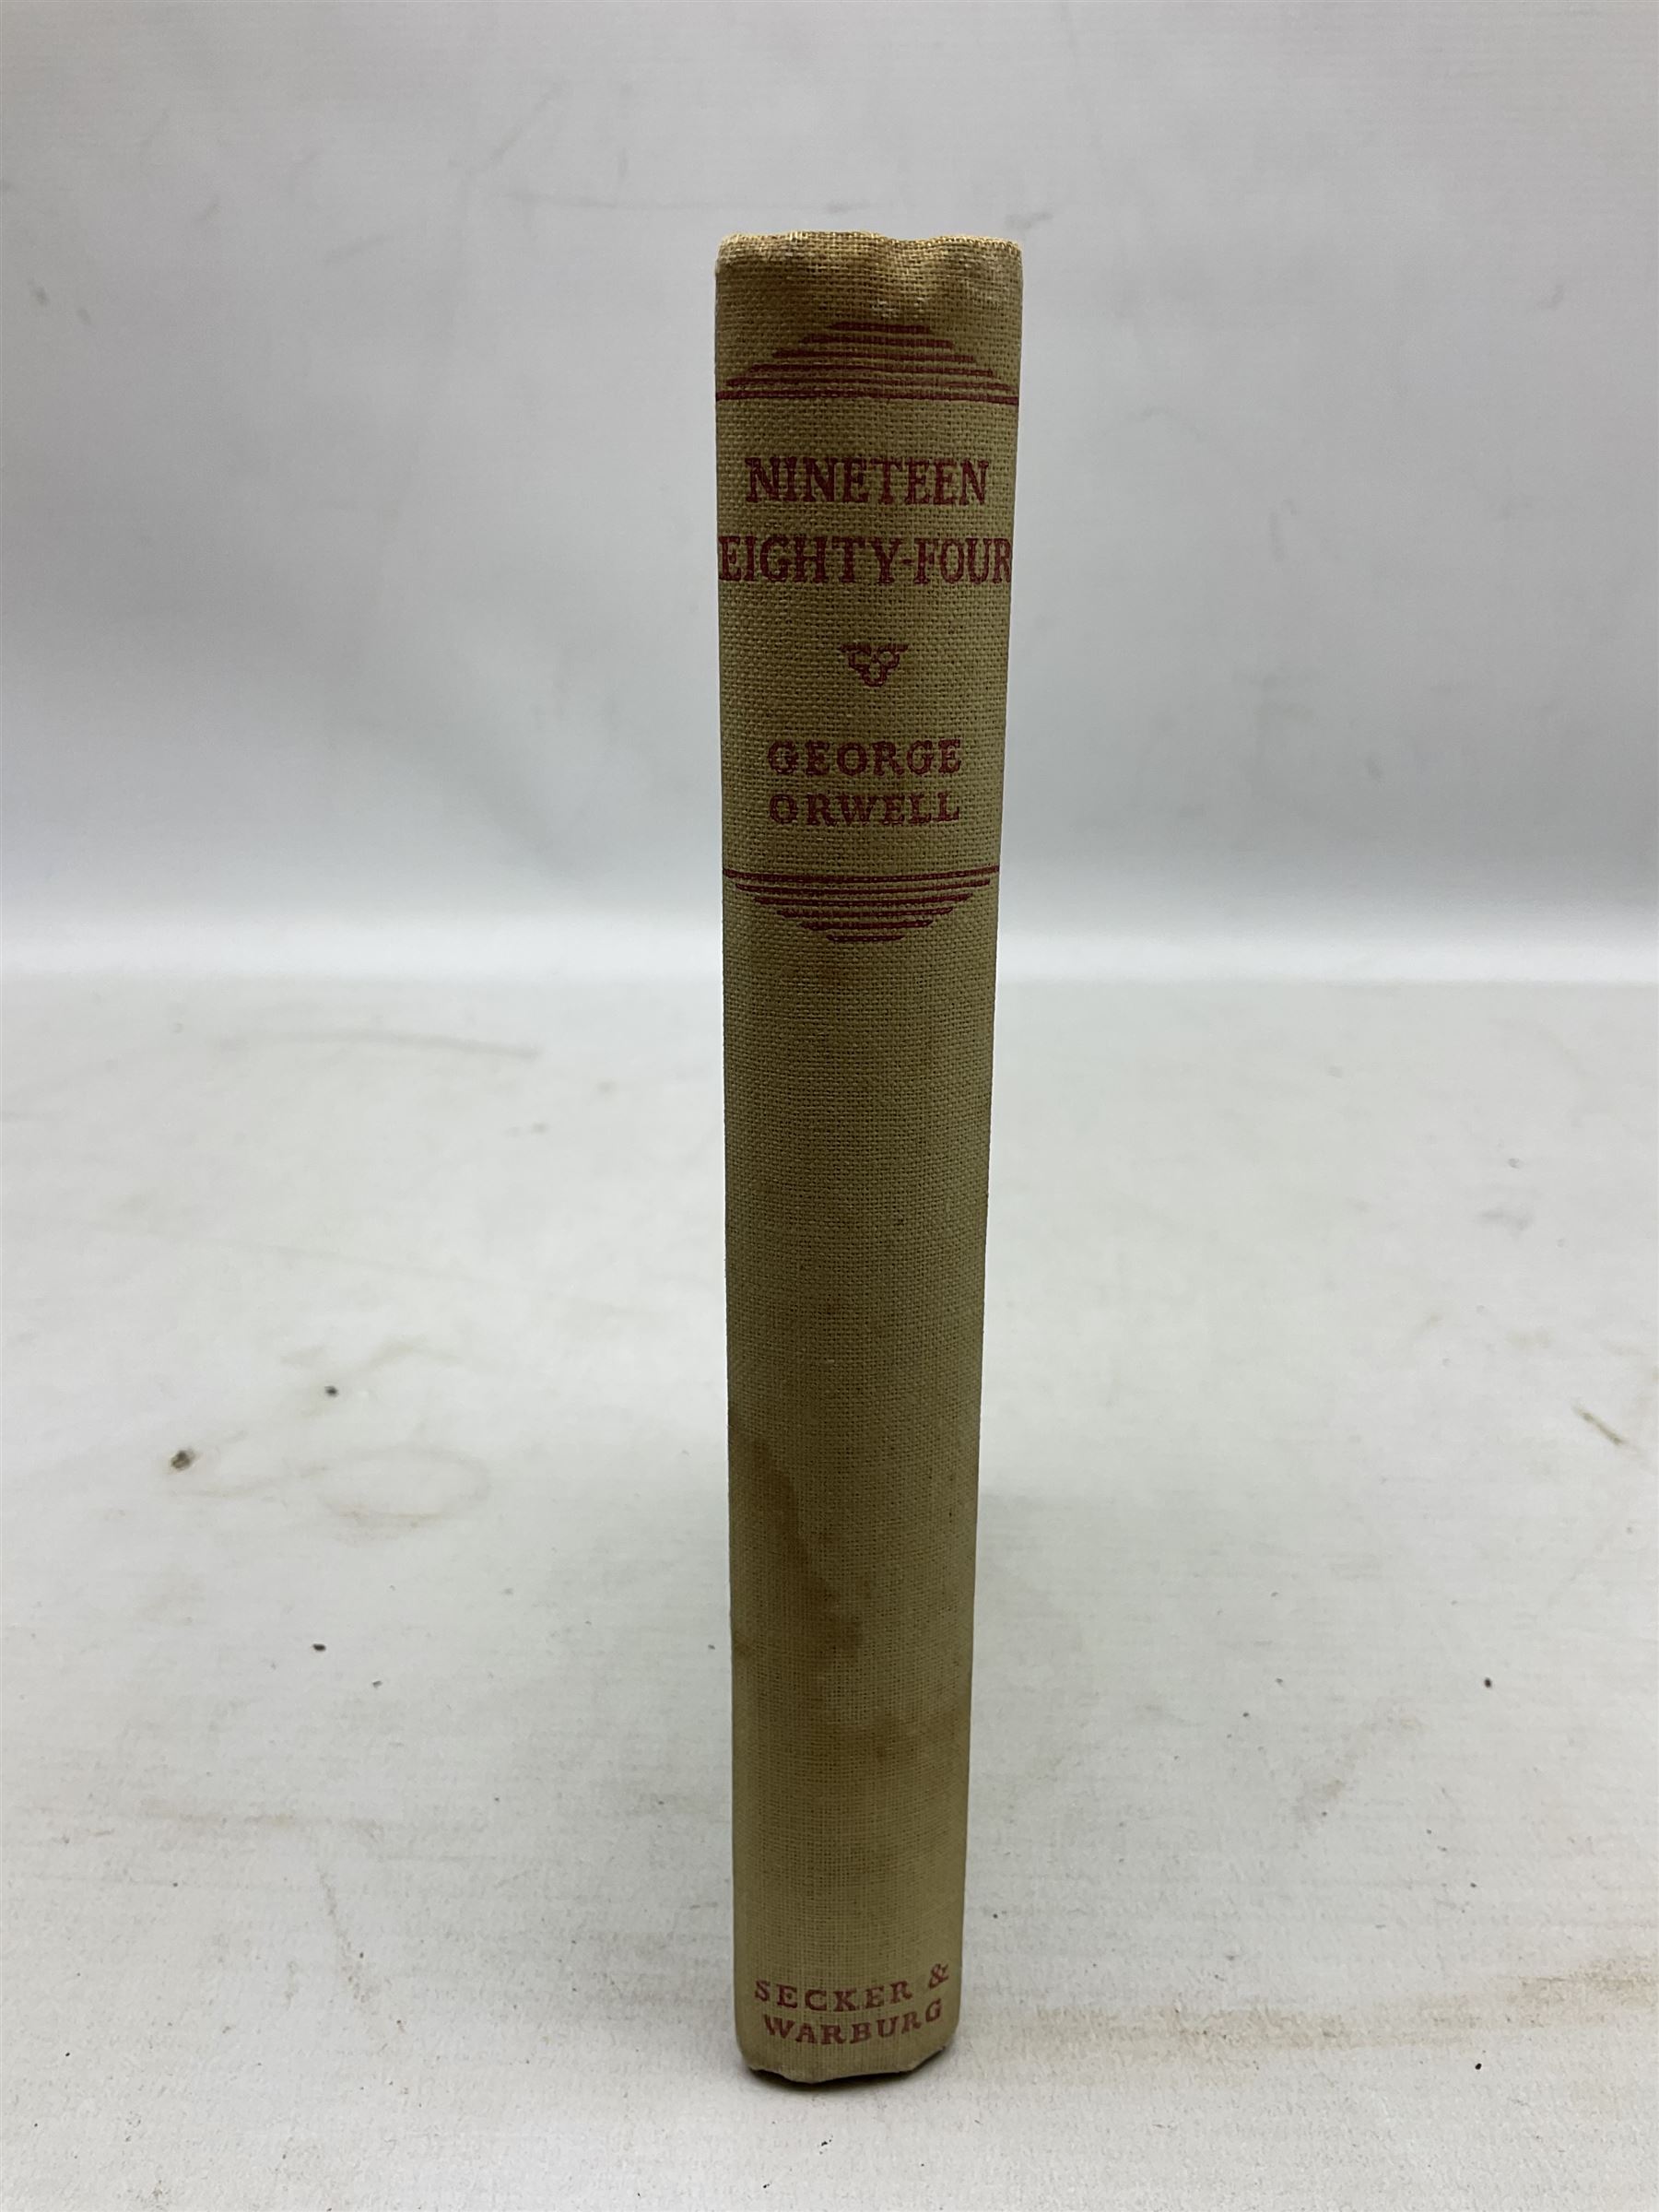 Orwell George: Nineteen eighty-four. 1949. First edition. Secker & Warburg. Green cloth binding. - Image 3 of 9